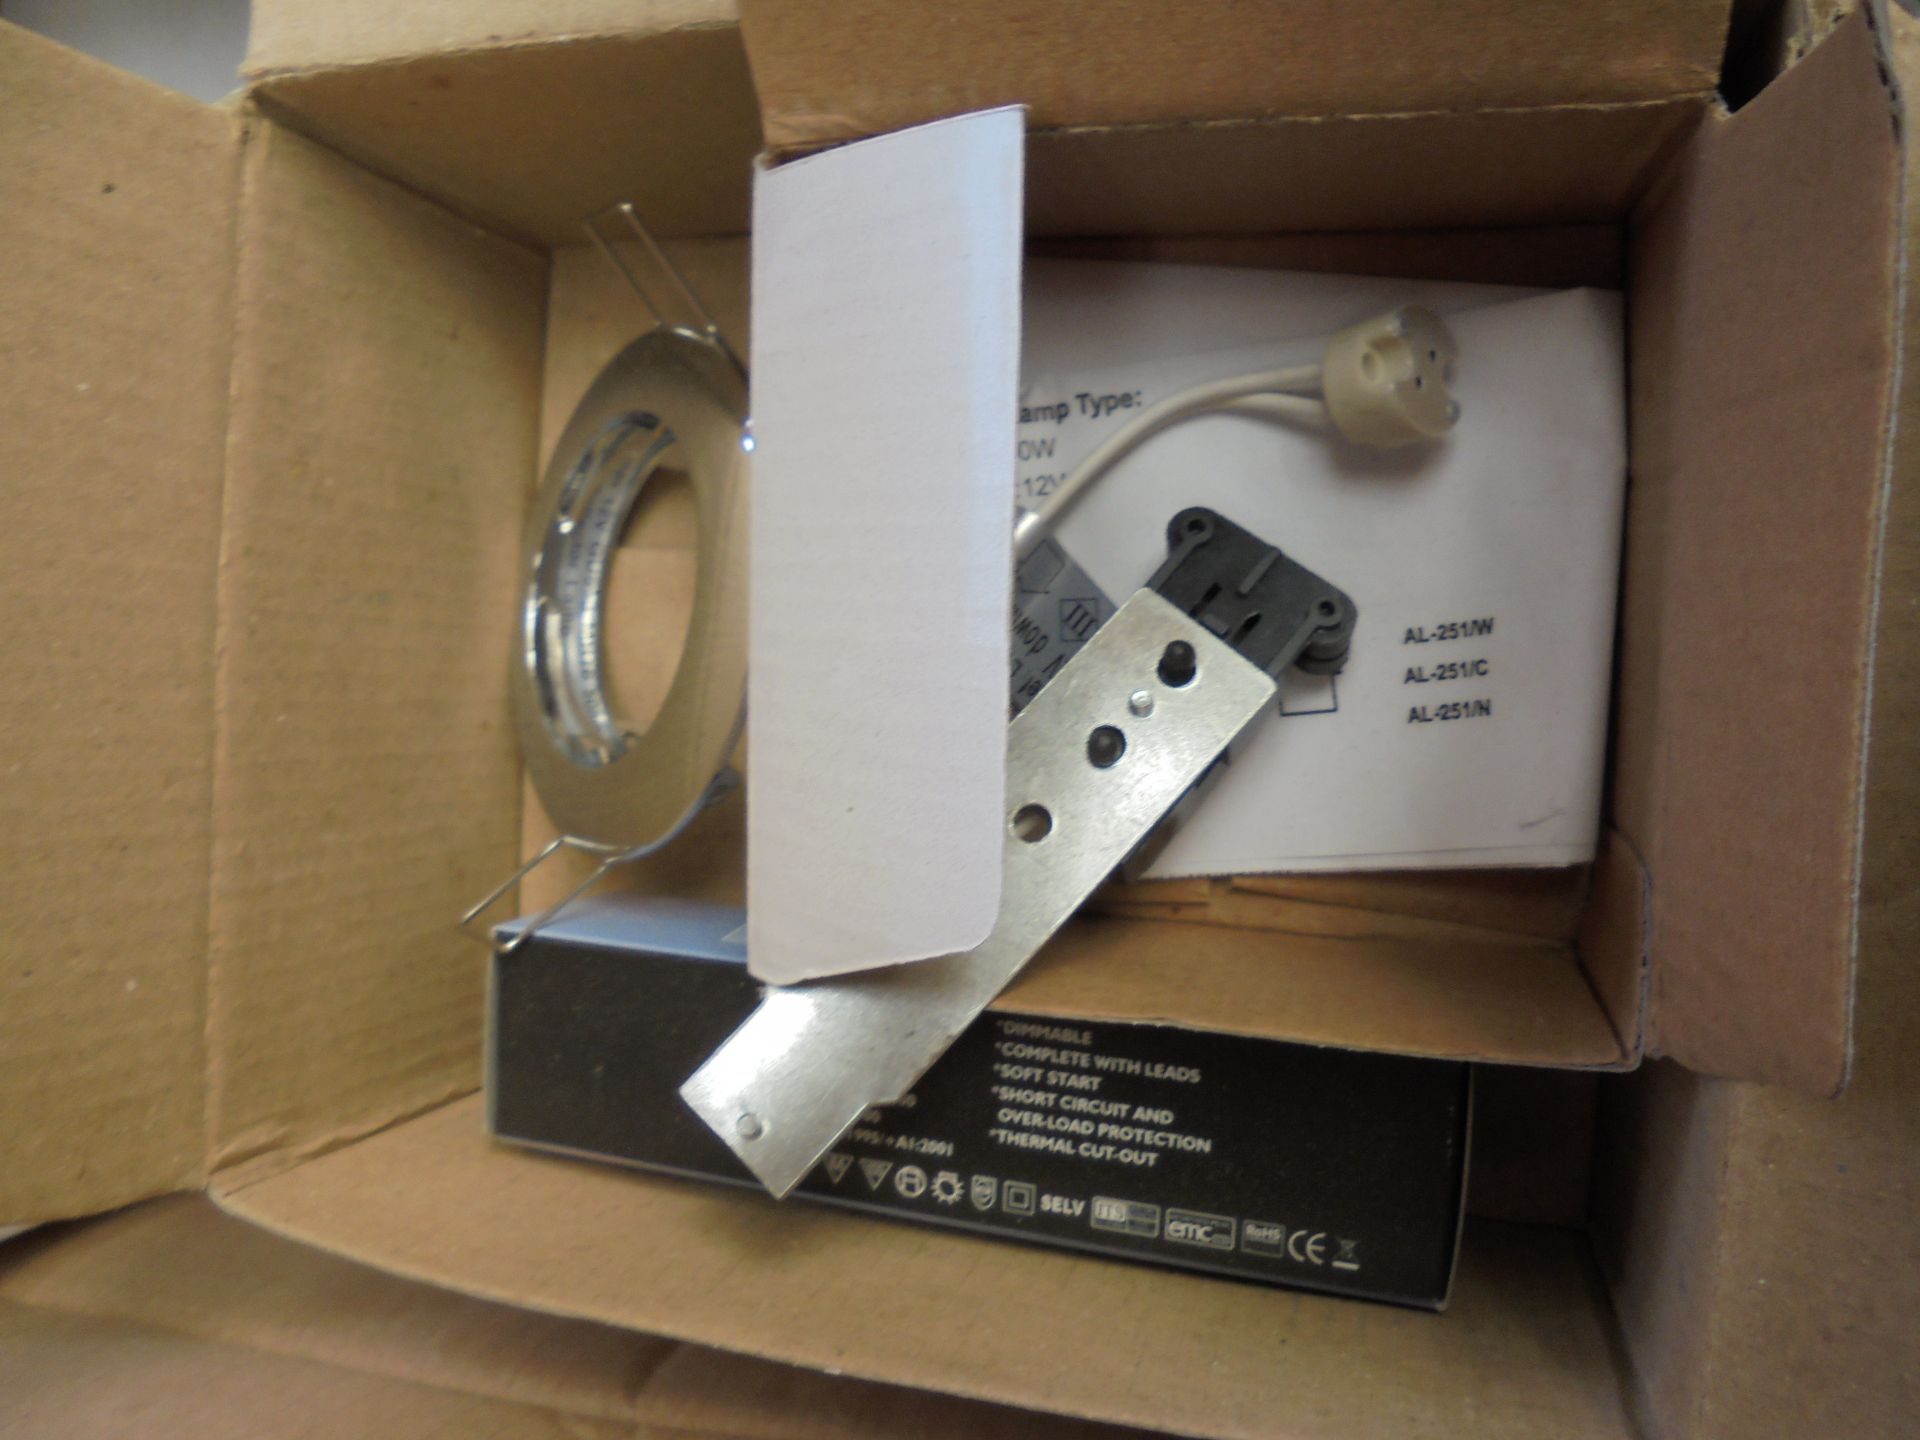 5x Chelsom downlights with fixings, all new and boxed.